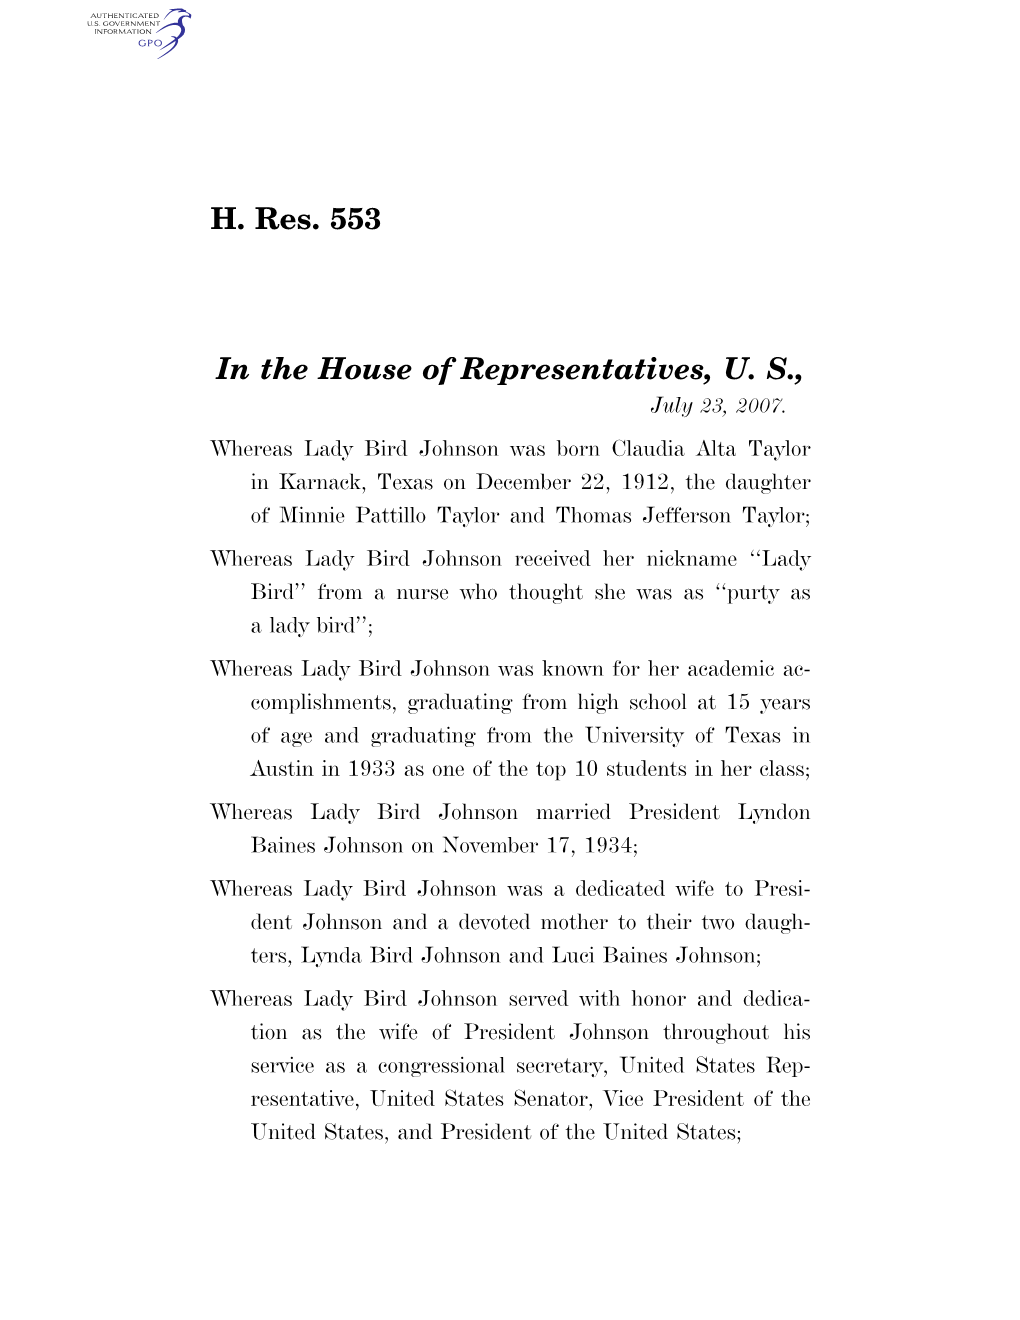 H. Res. 553 in the House of Representatives